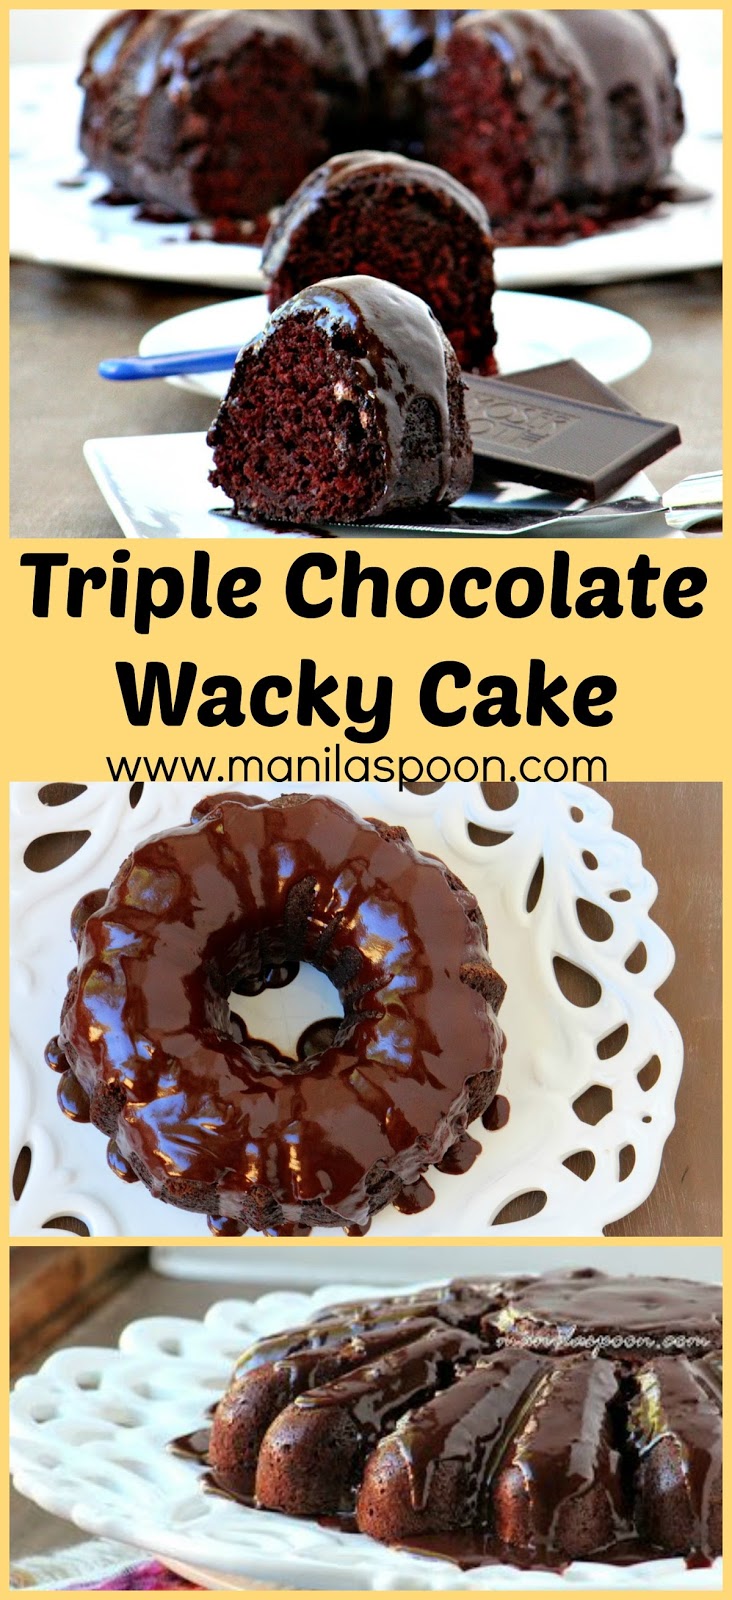 This version of the Depression (Wacky) cake is truly scrumptious - still an EGG-FREE and DAIRY-FREE cake batter but with triple the chocolate goodness! A very well-loved recipe, indeed!